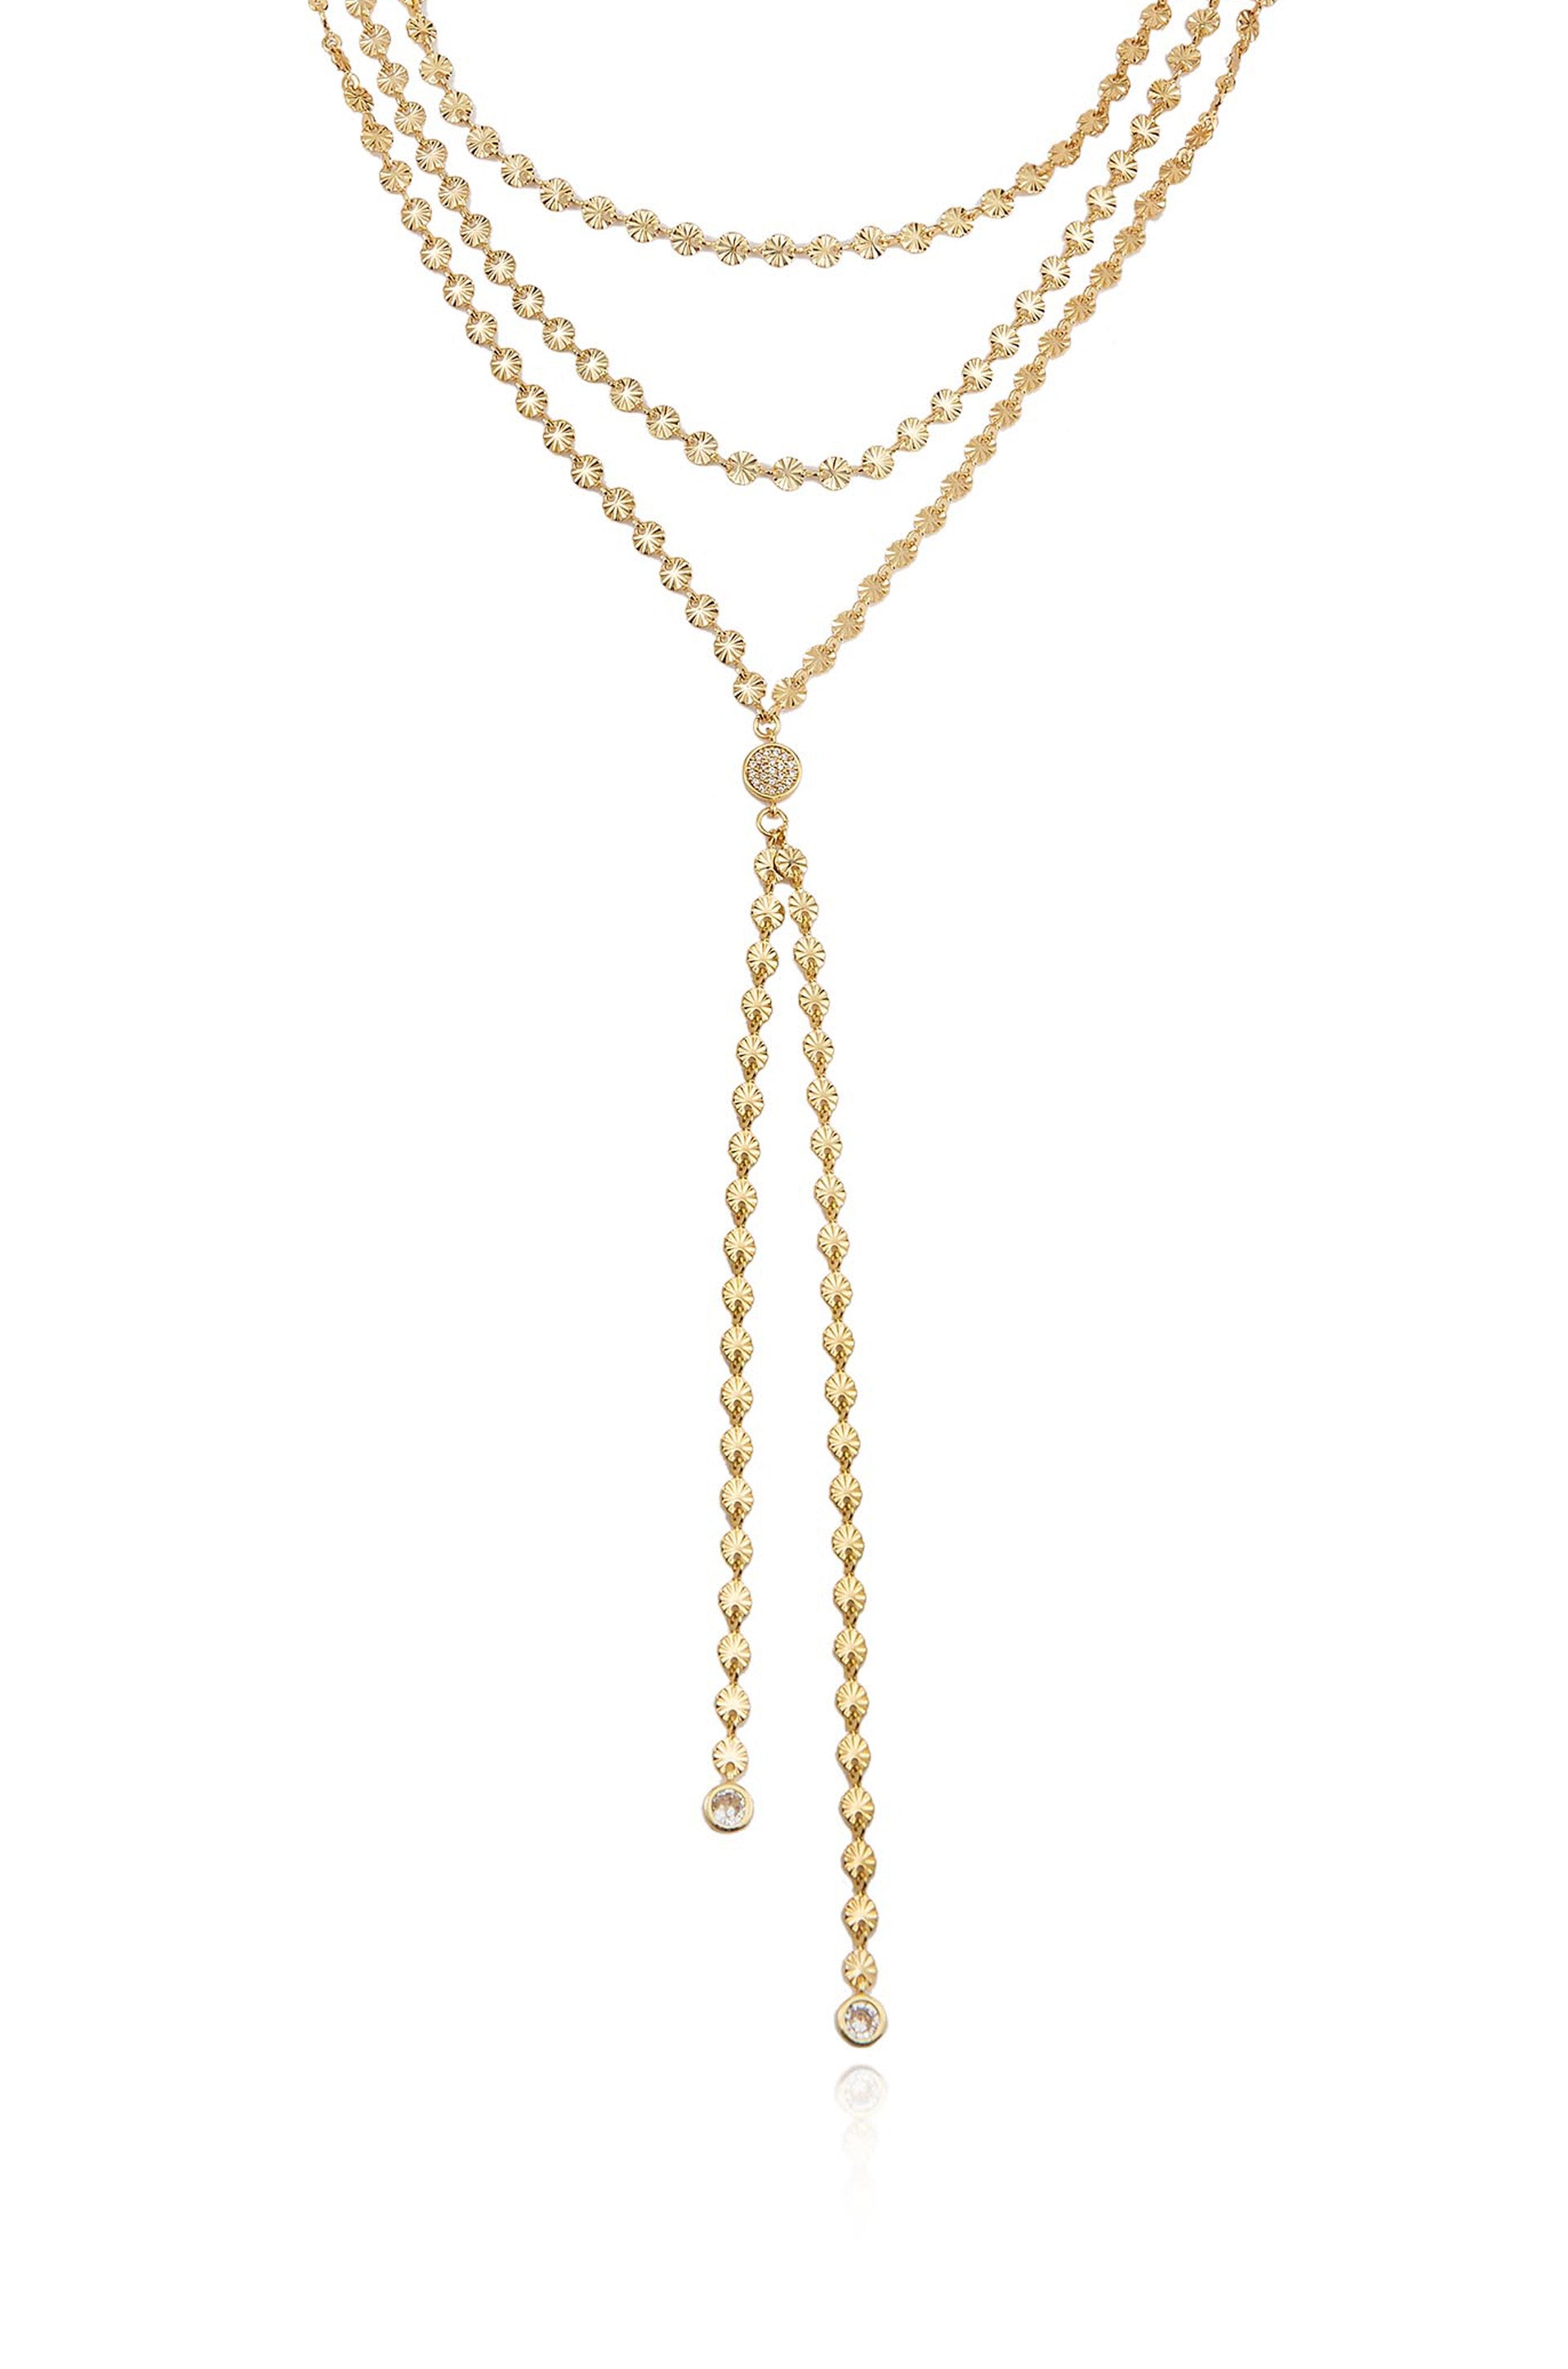 Royal Layered 18k Gold Plated Chain Lariat Necklace close